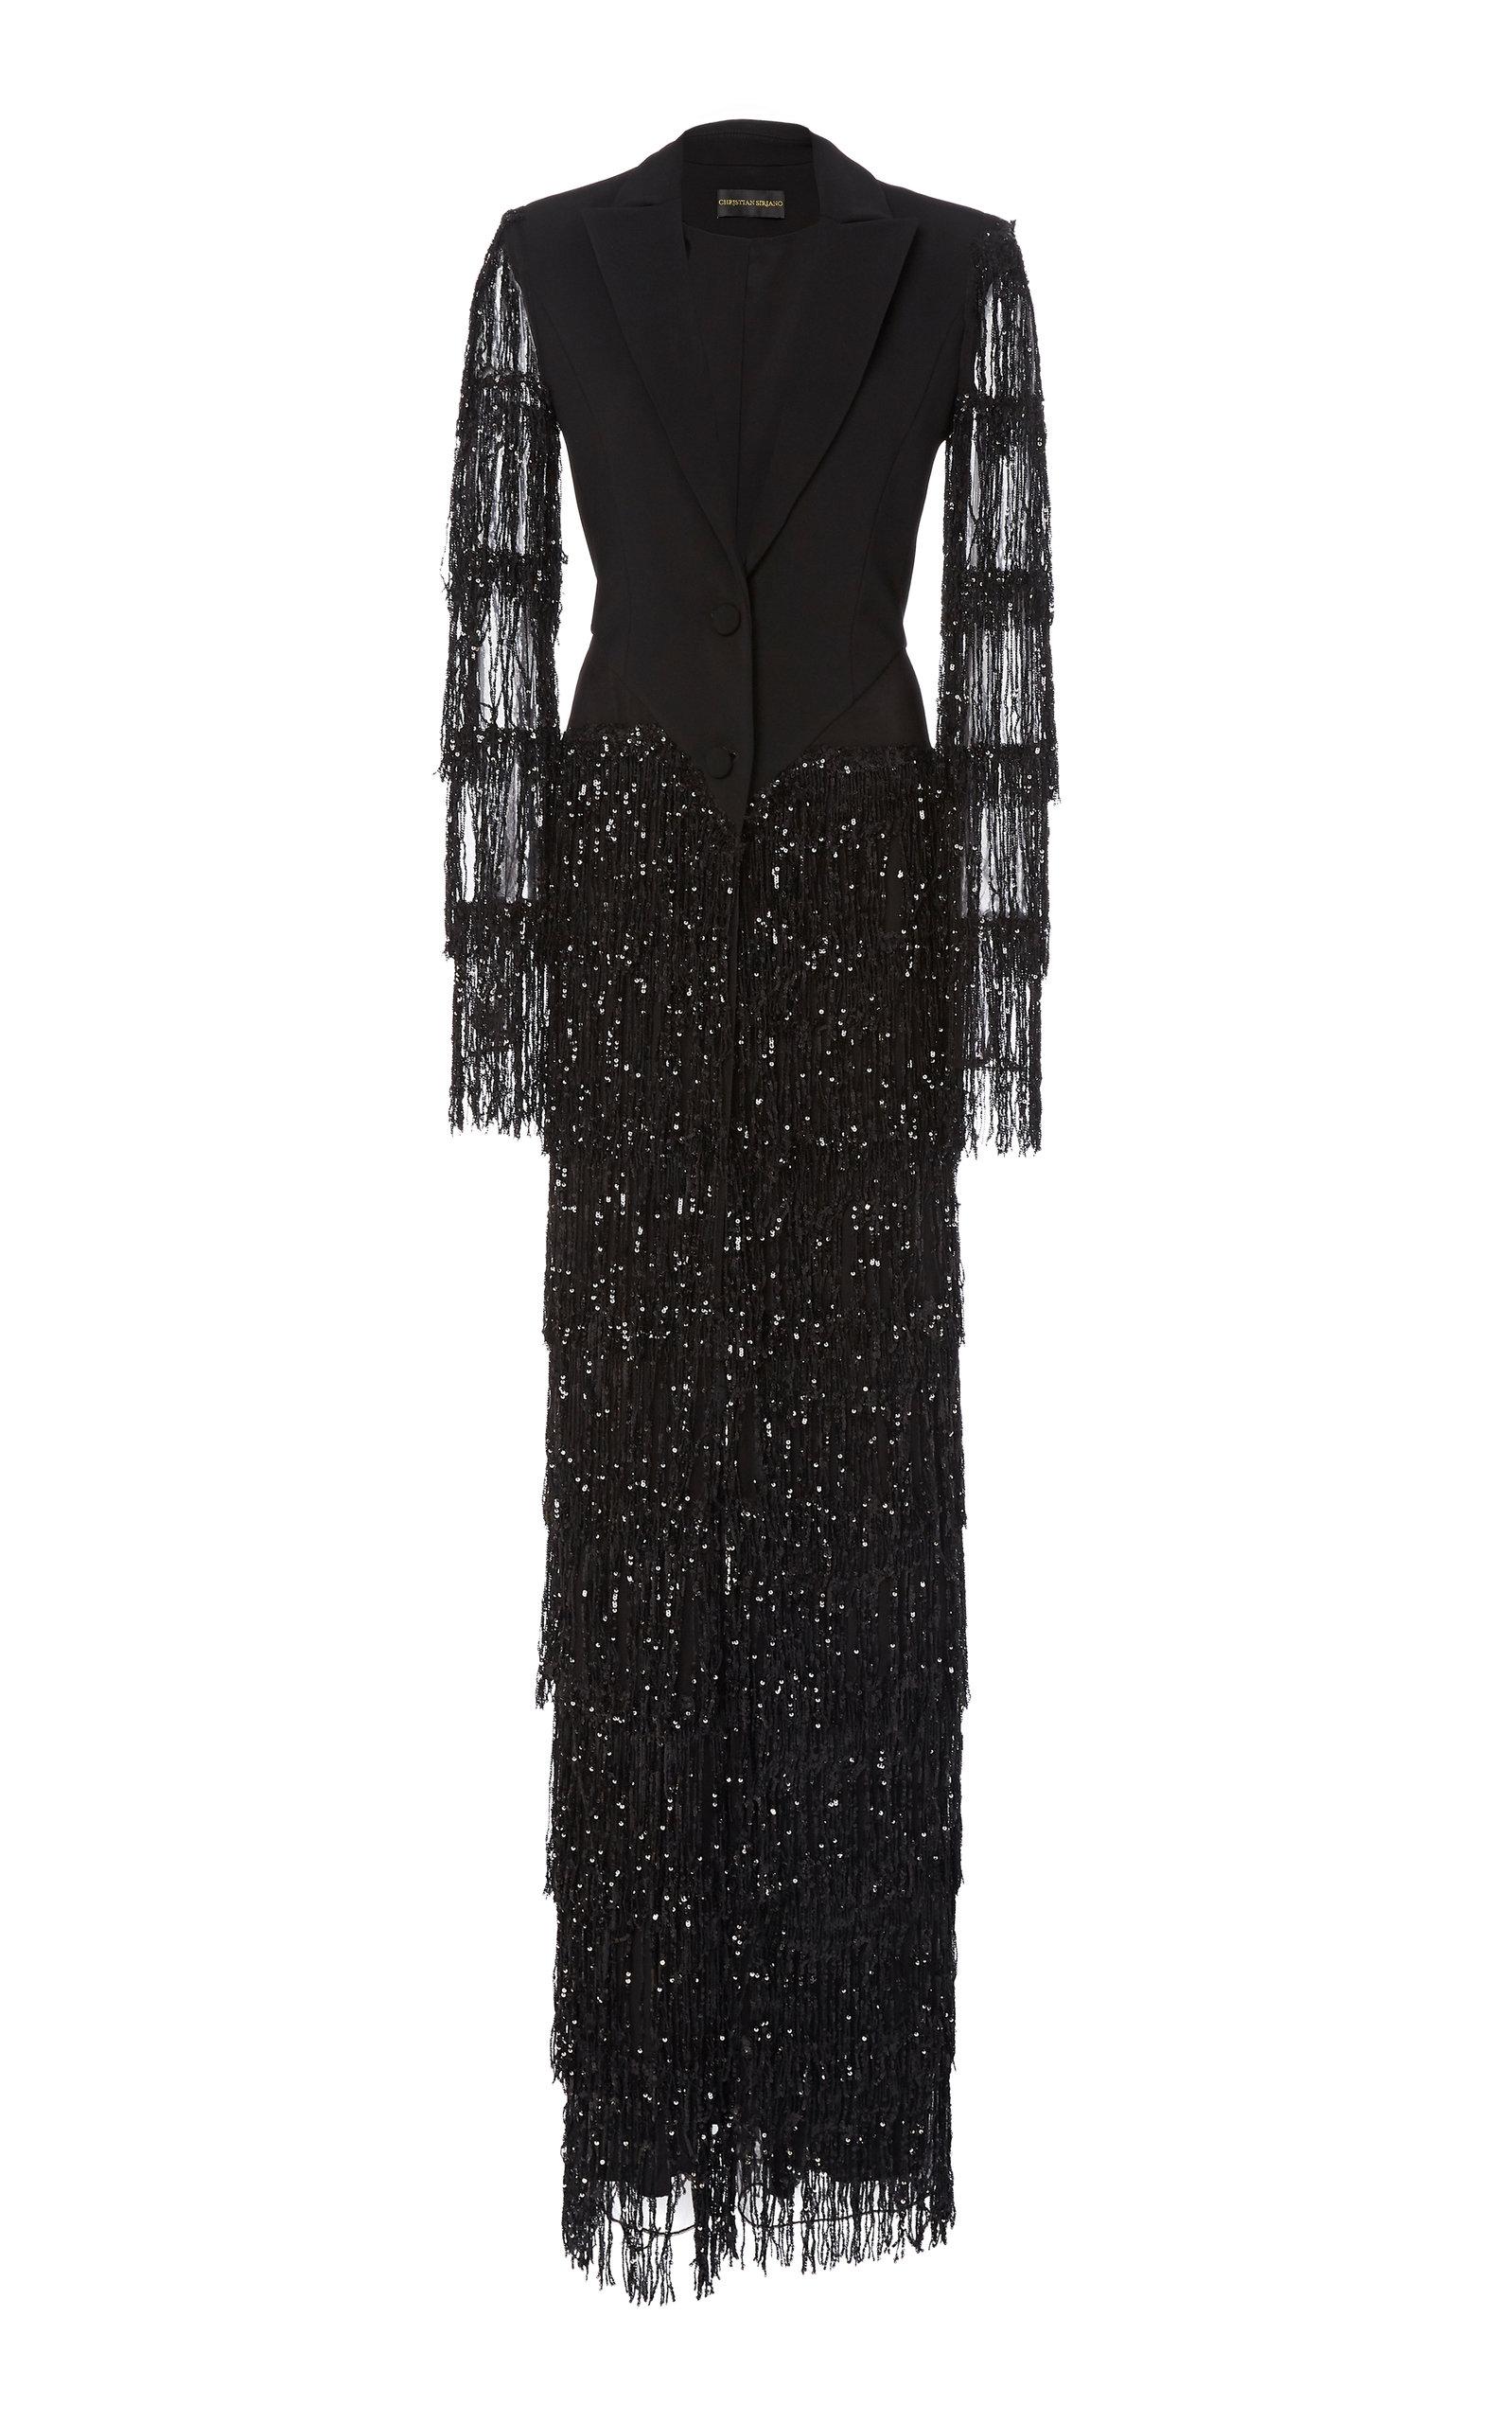 Christian Siriano Synthetic Sequined Tiered Fringed Tuxedo Gown in ...